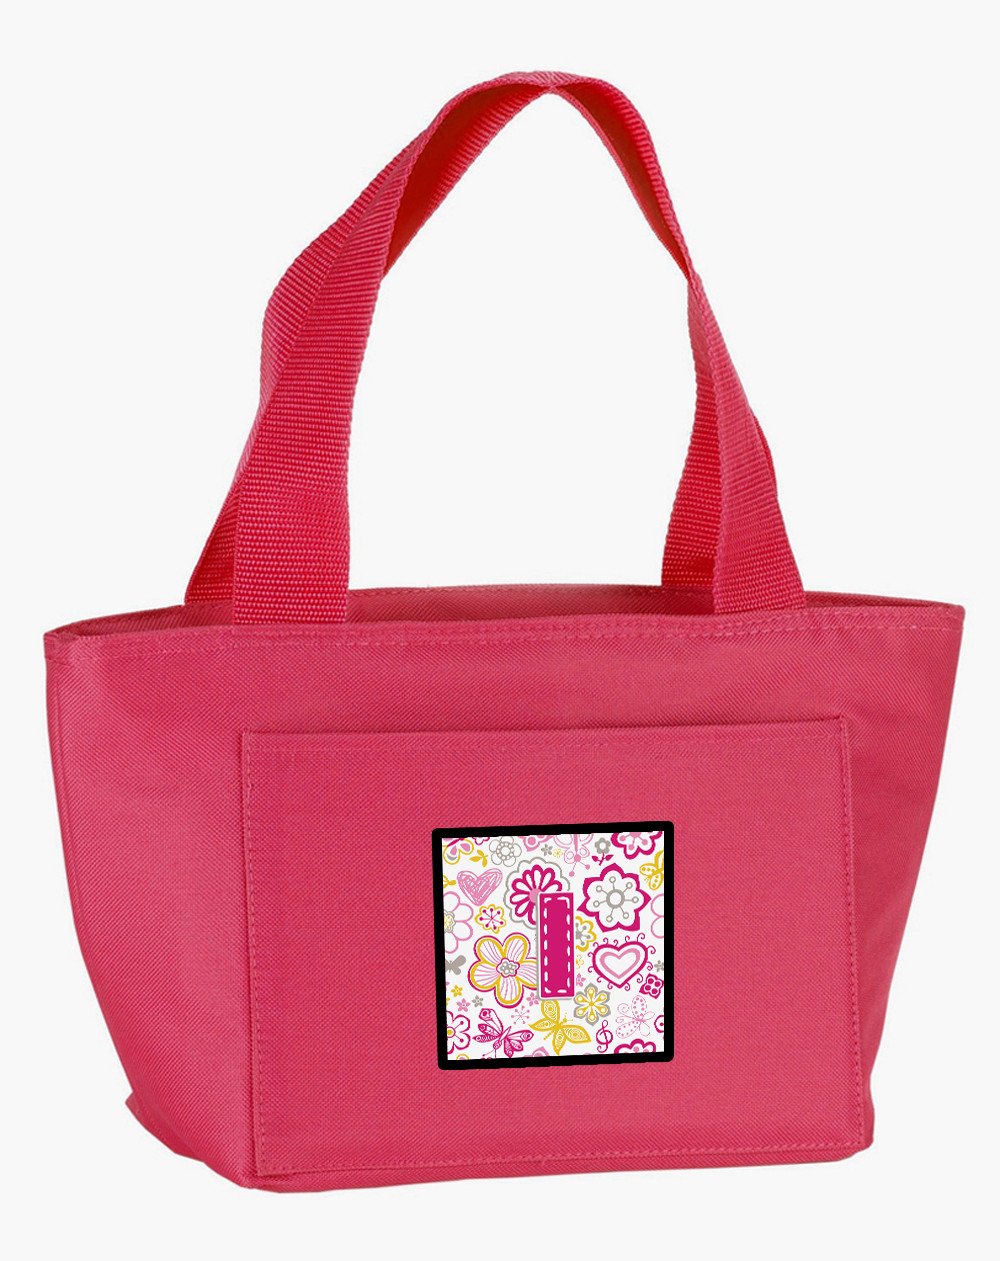 Letter I Flowers and Butterflies Pink Lunch Bag CJ2005-IPK-8808 by Caroline's Treasures